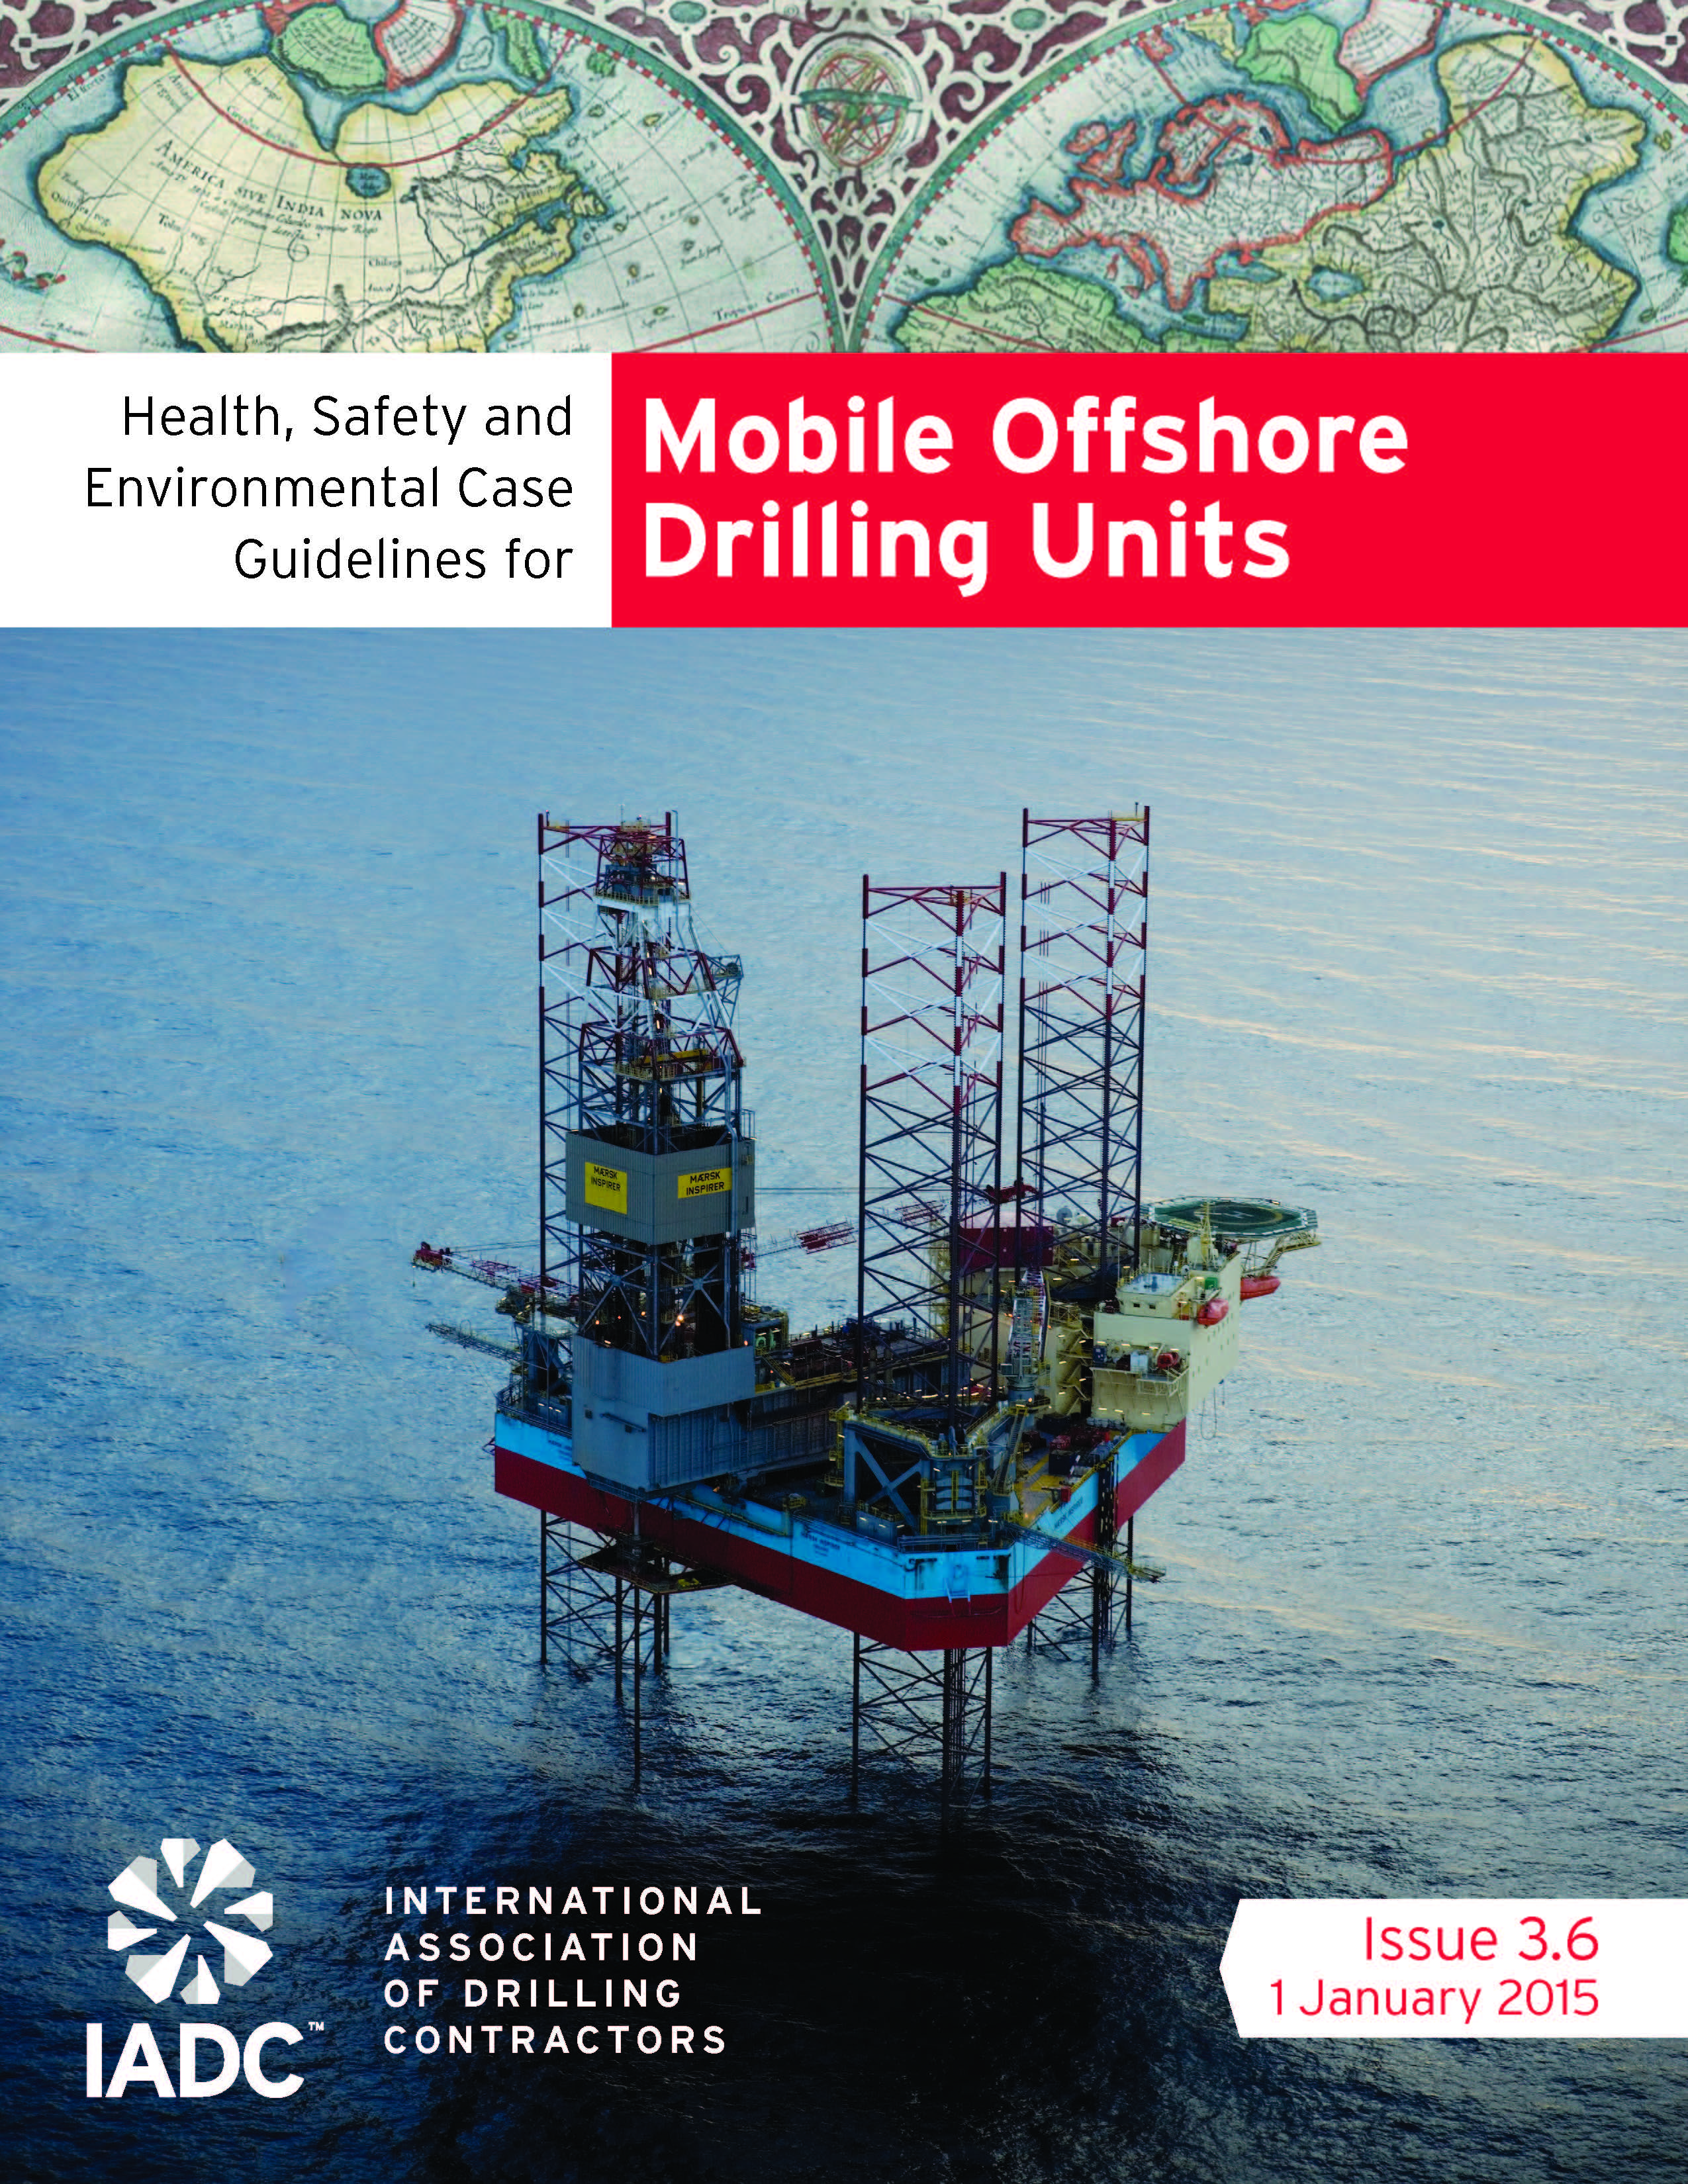 IADC HSE Case Guidelines for Mobile Offshore Drilling Units